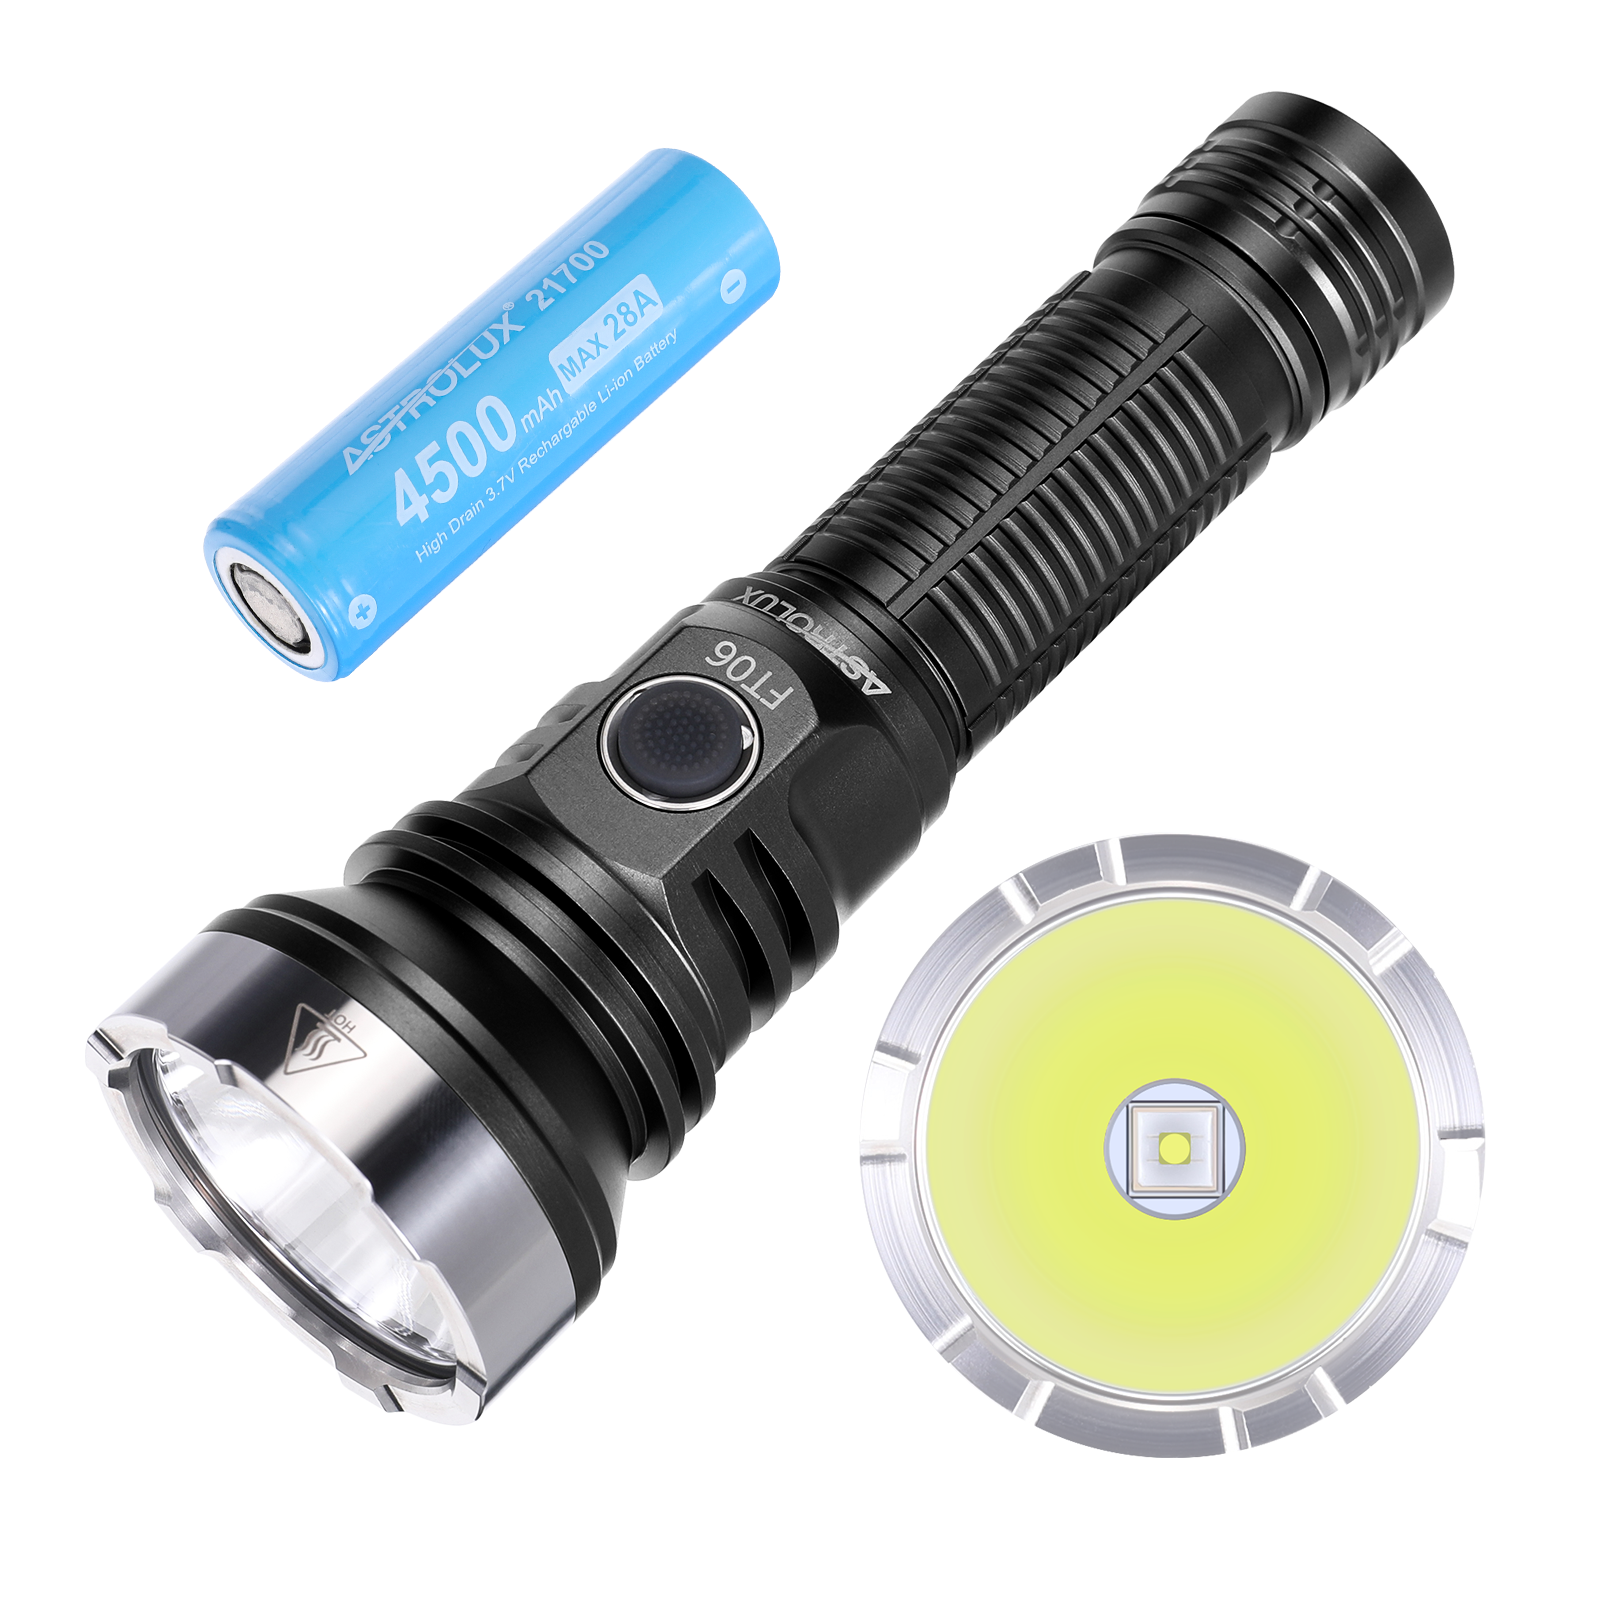 best price,astrolux,ft06,2850lm,1019m,flashlight,with,4500mah,discount